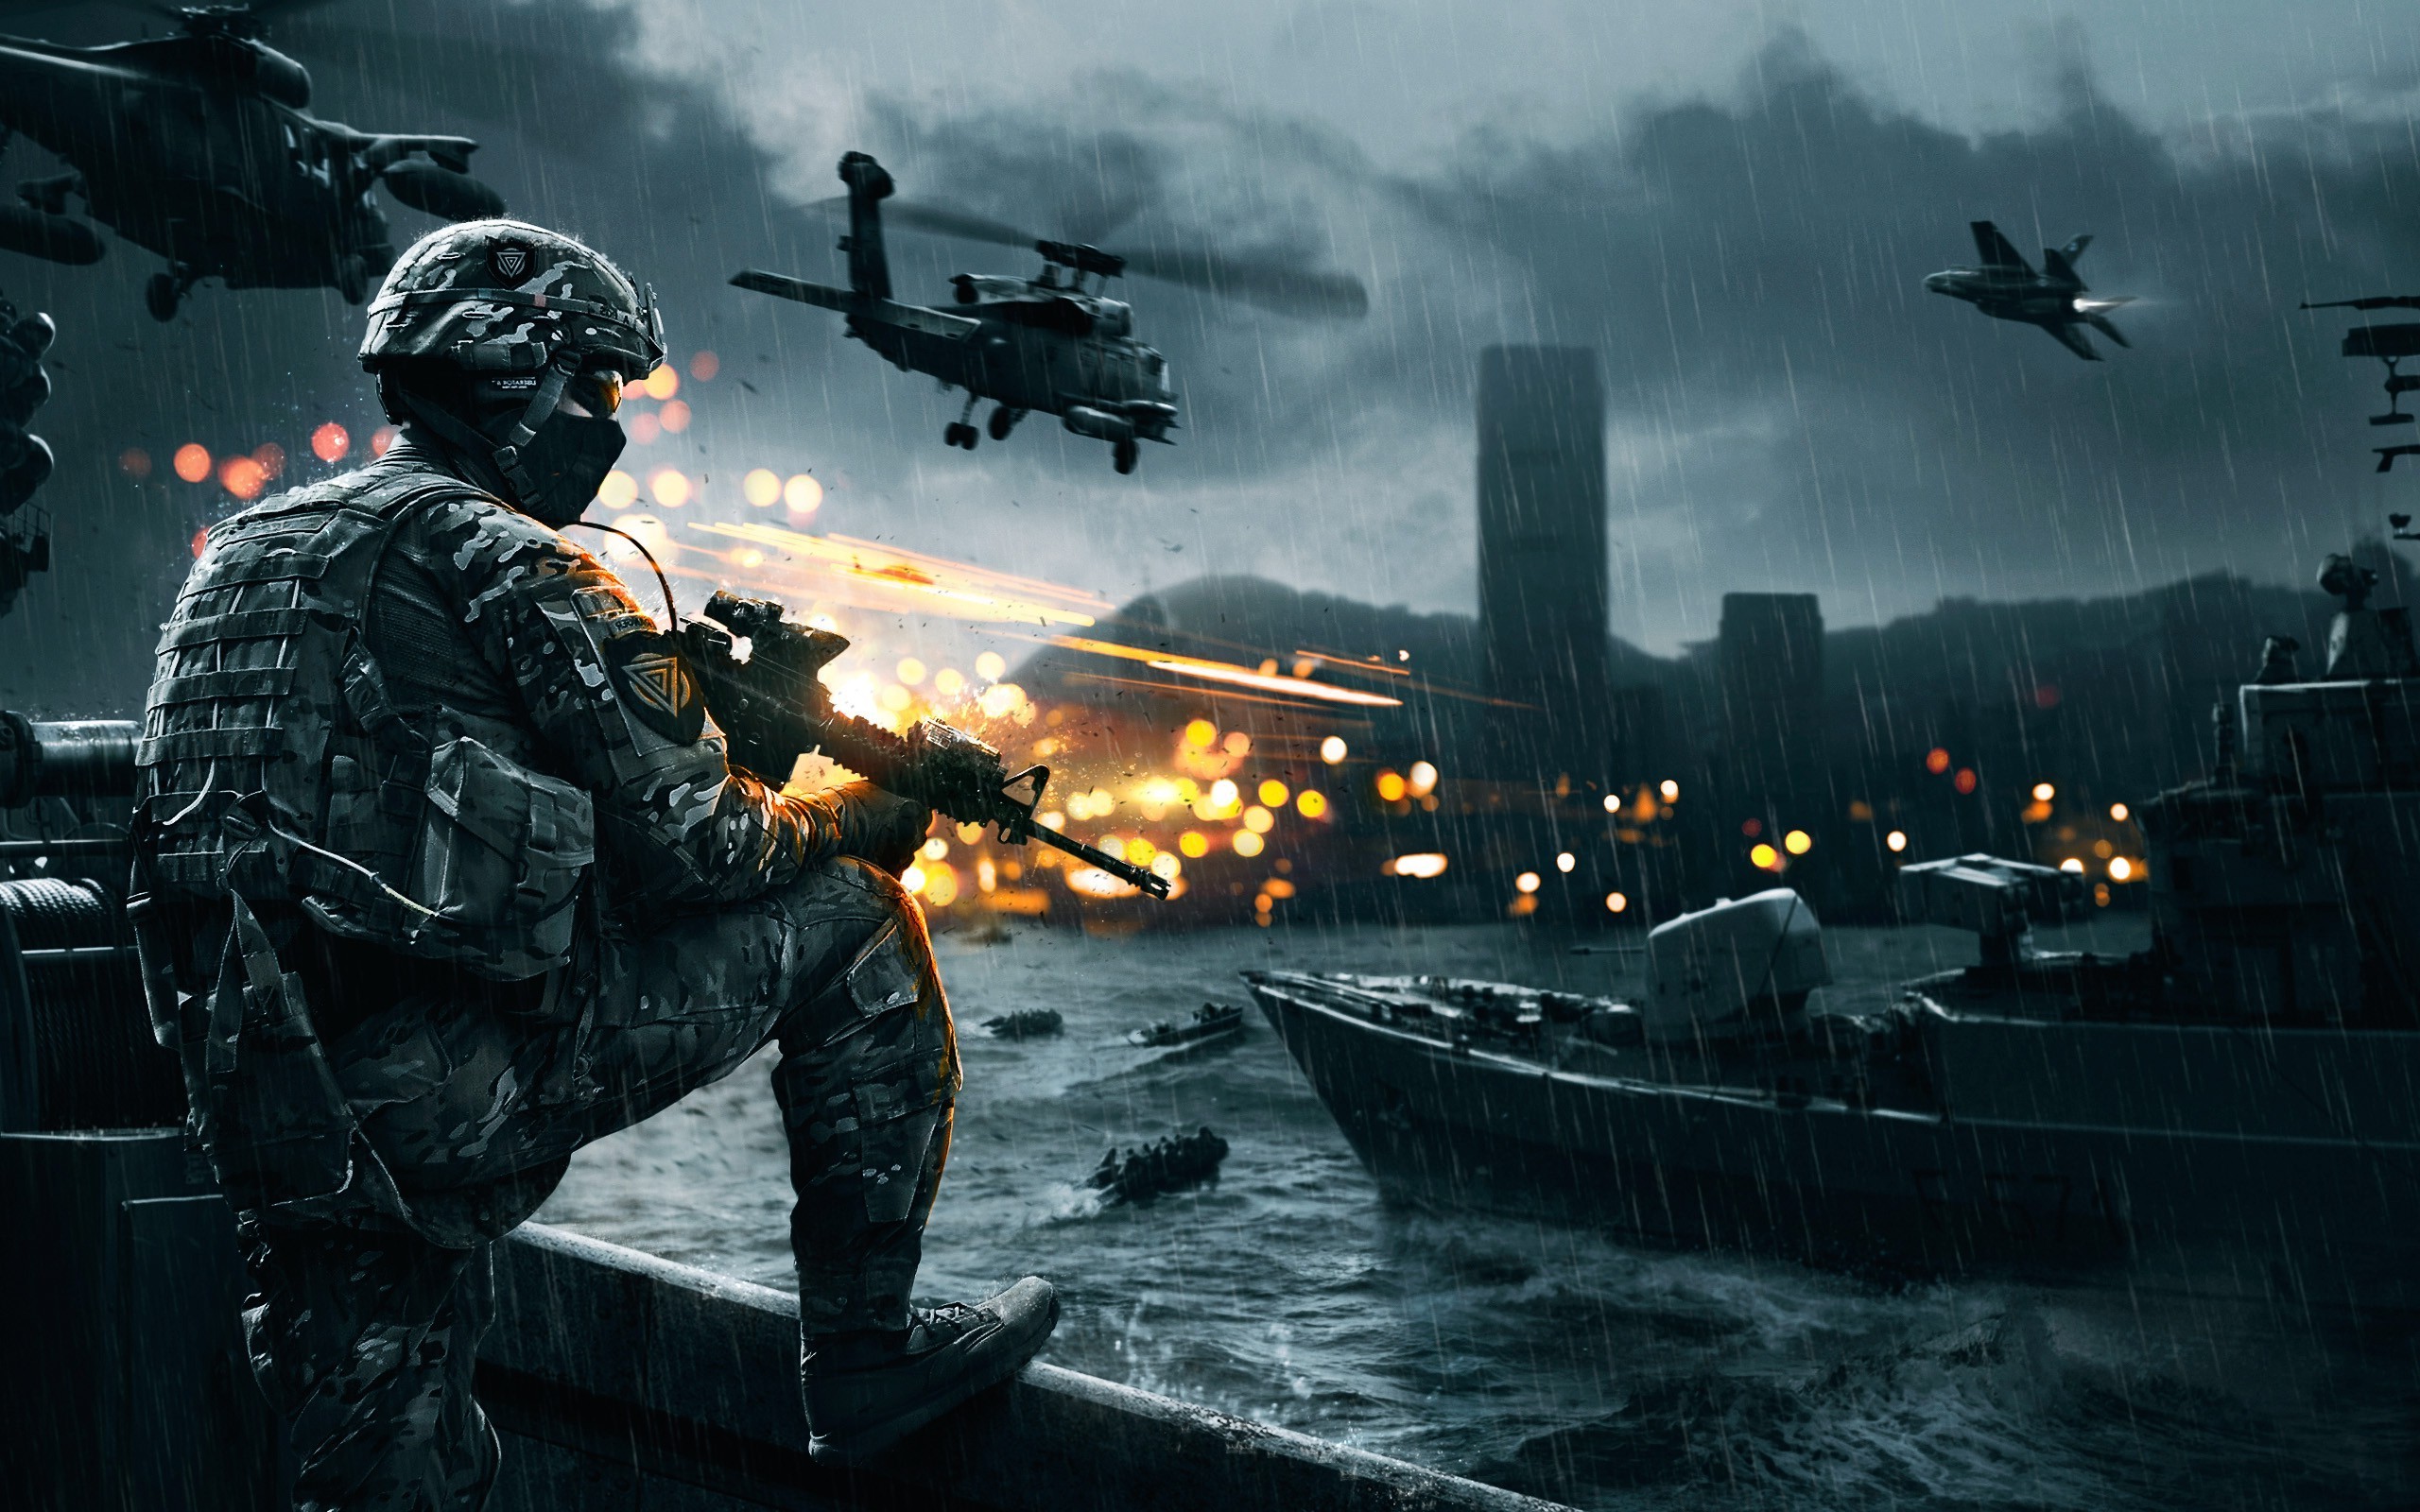 army, Helicopters, Boat, Video Games, Battlefield 4 Wallpaper